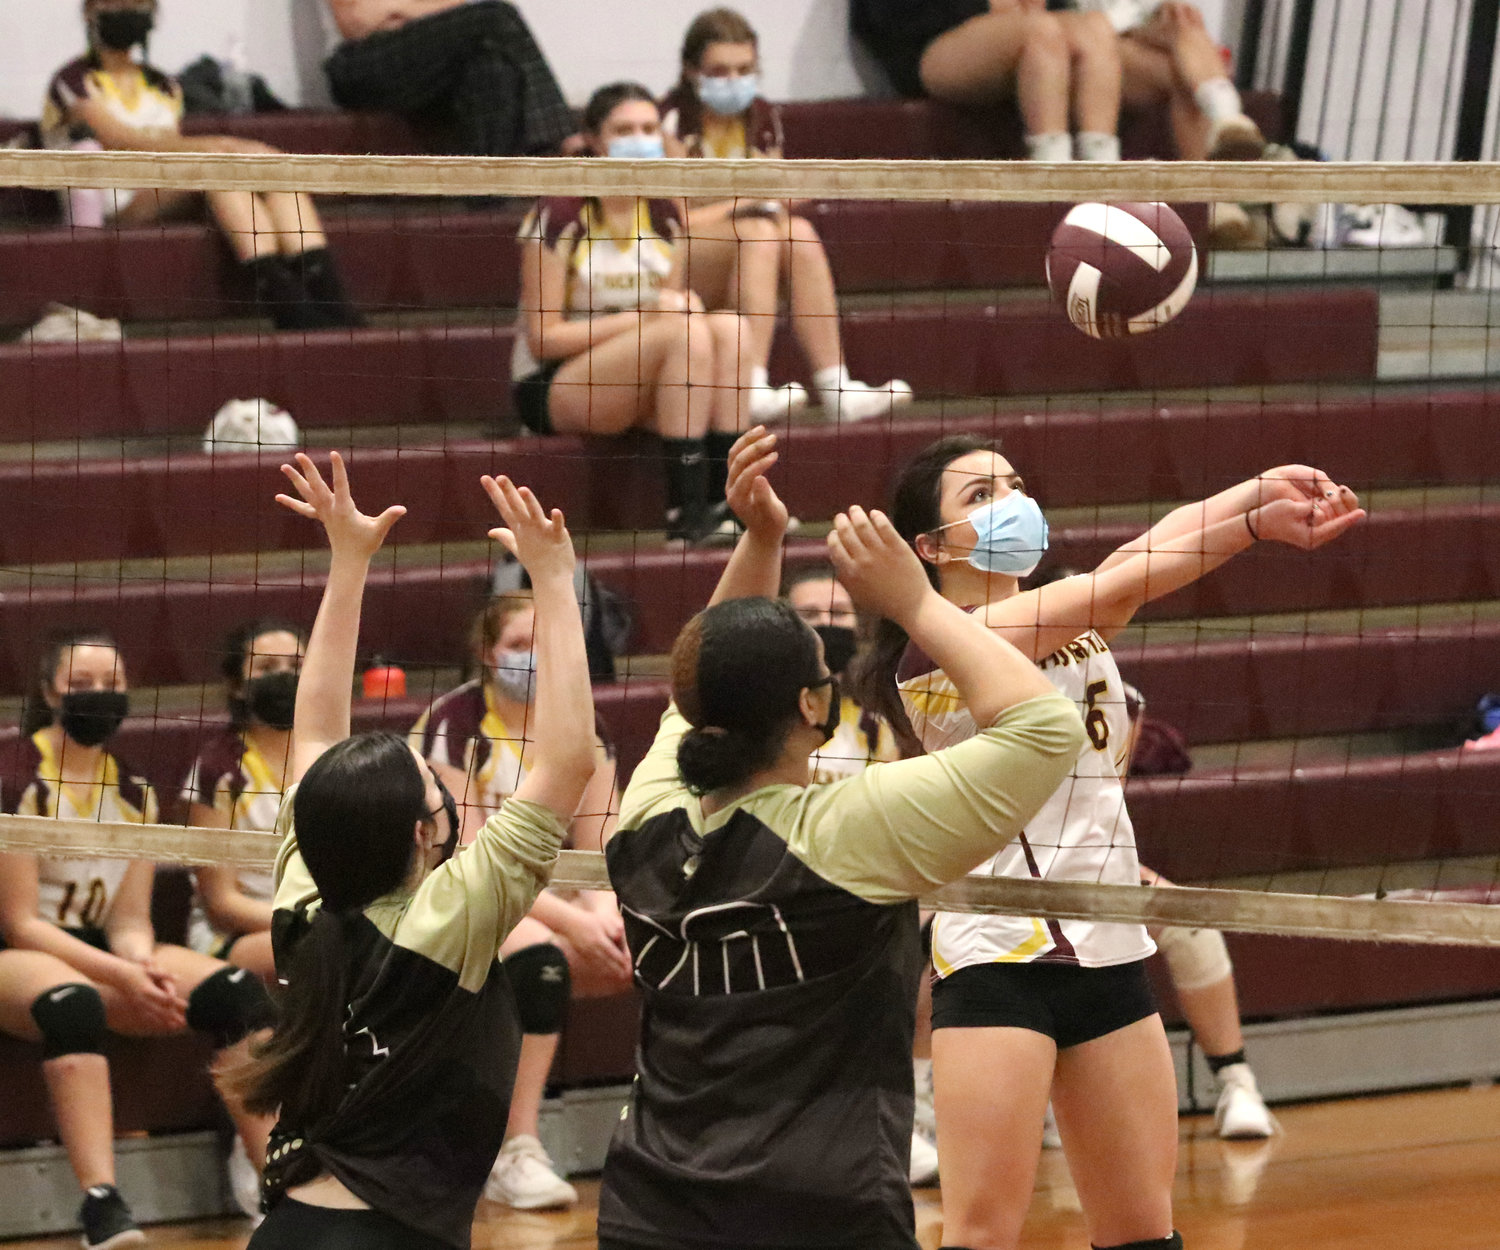 Gabby Piscani volleys the ball over the net.